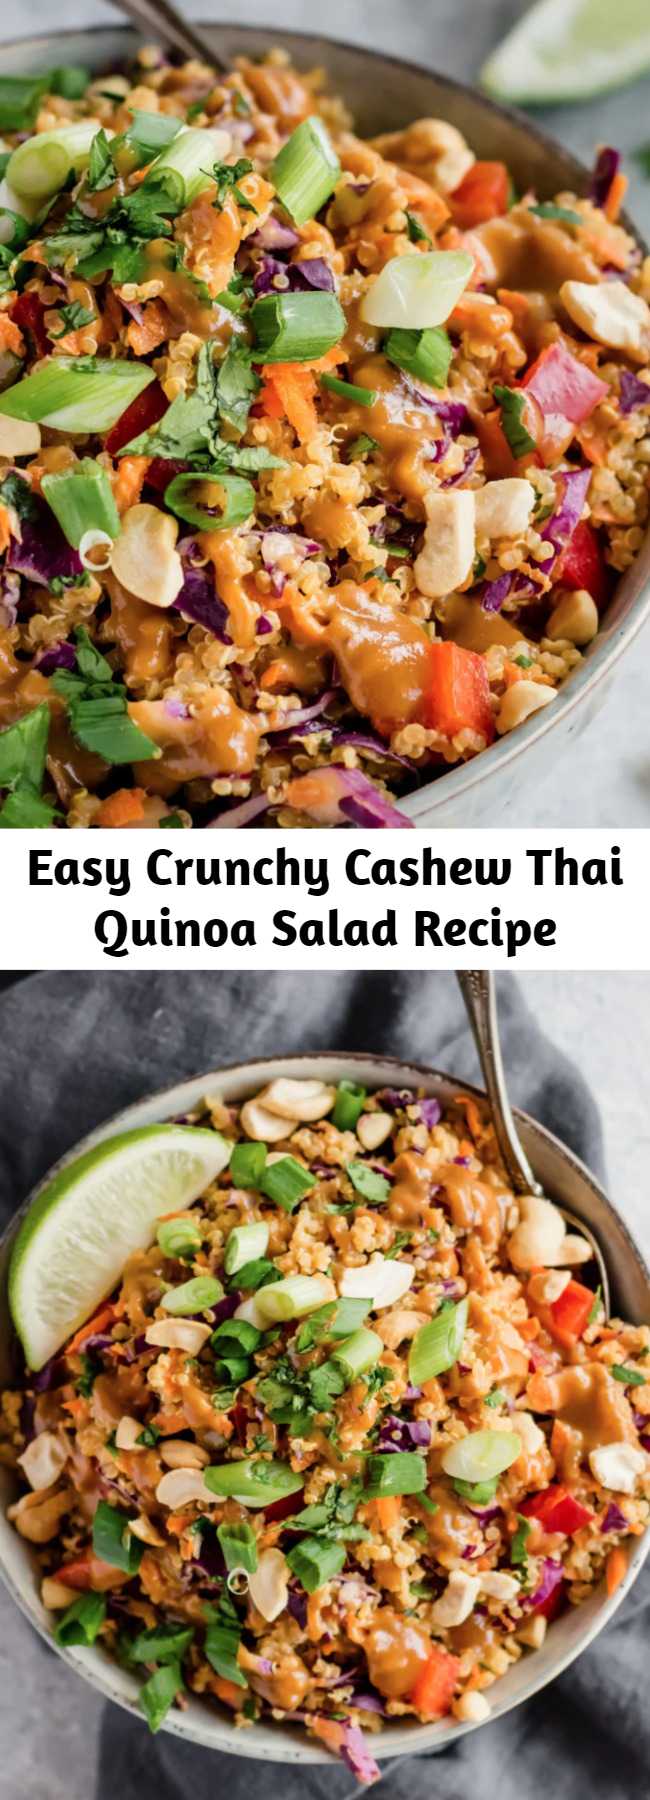 Easy Crunchy Cashew Thai Quinoa Salad Recipe - Delicious vegan and easily gluten-free salad with Thai flavors and a perfect crunch. It's even better the next day! #veganrecipe #veganfood #thaifood #vegetarian #plantbased #healthylunch #lunchideas #mealprep #mealprepping #glutenfree #glutenfreerecipes